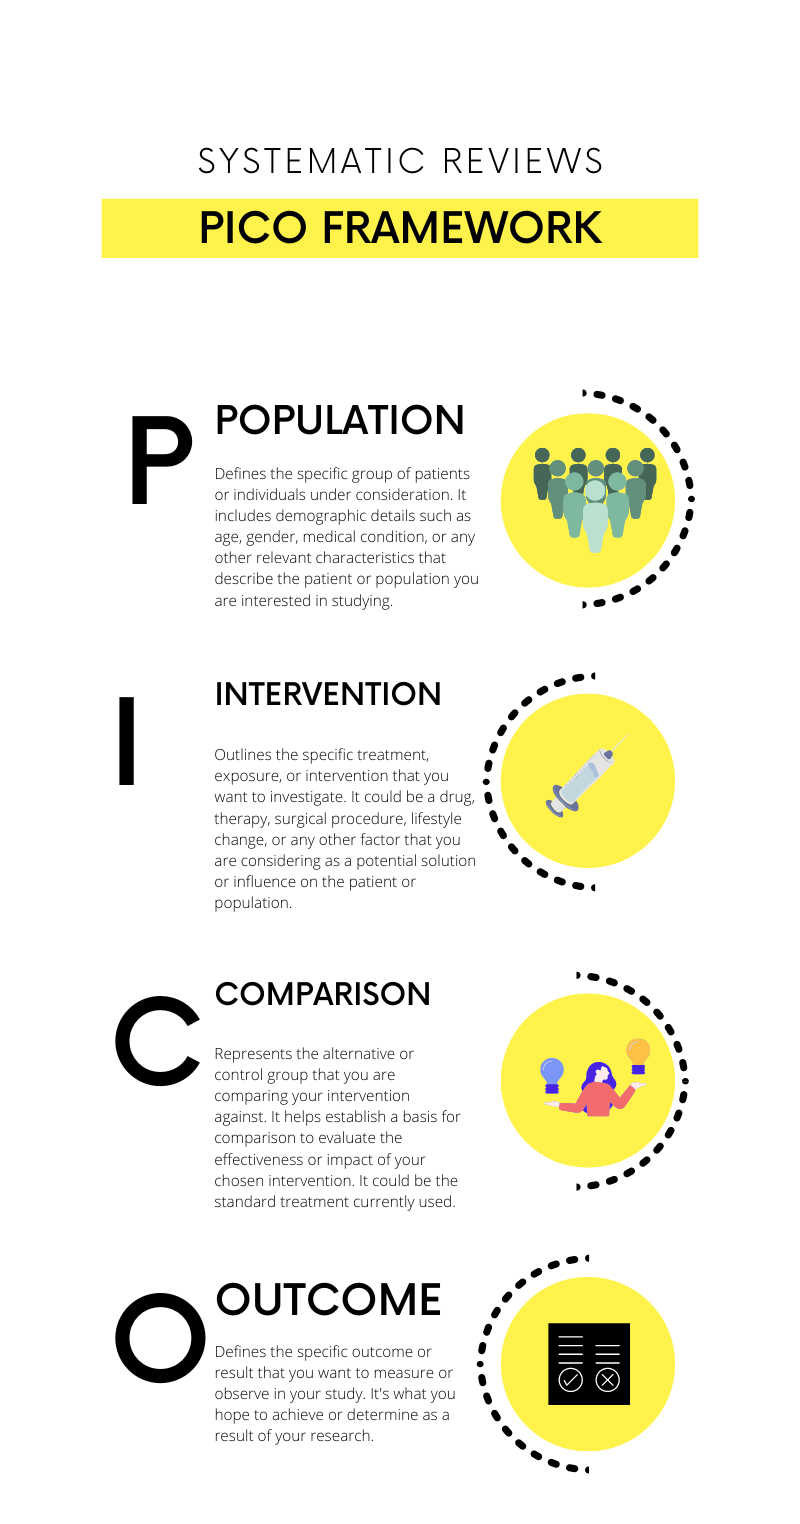 PICO framework systematic review